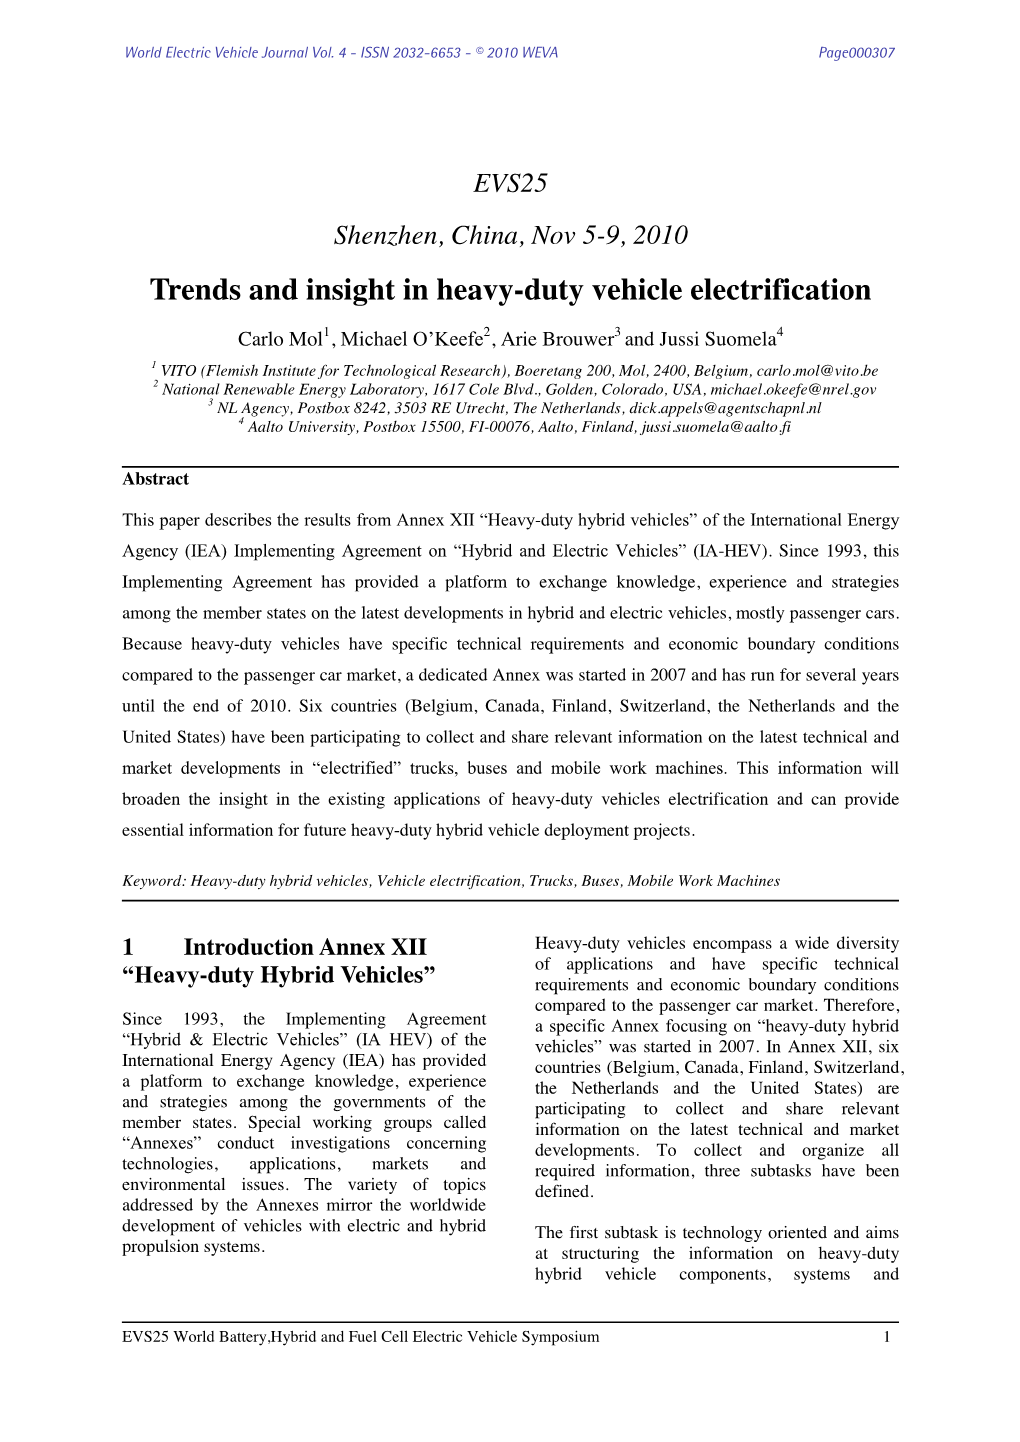 Trends and Insight in Heavy-Duty Vehicle Electrification